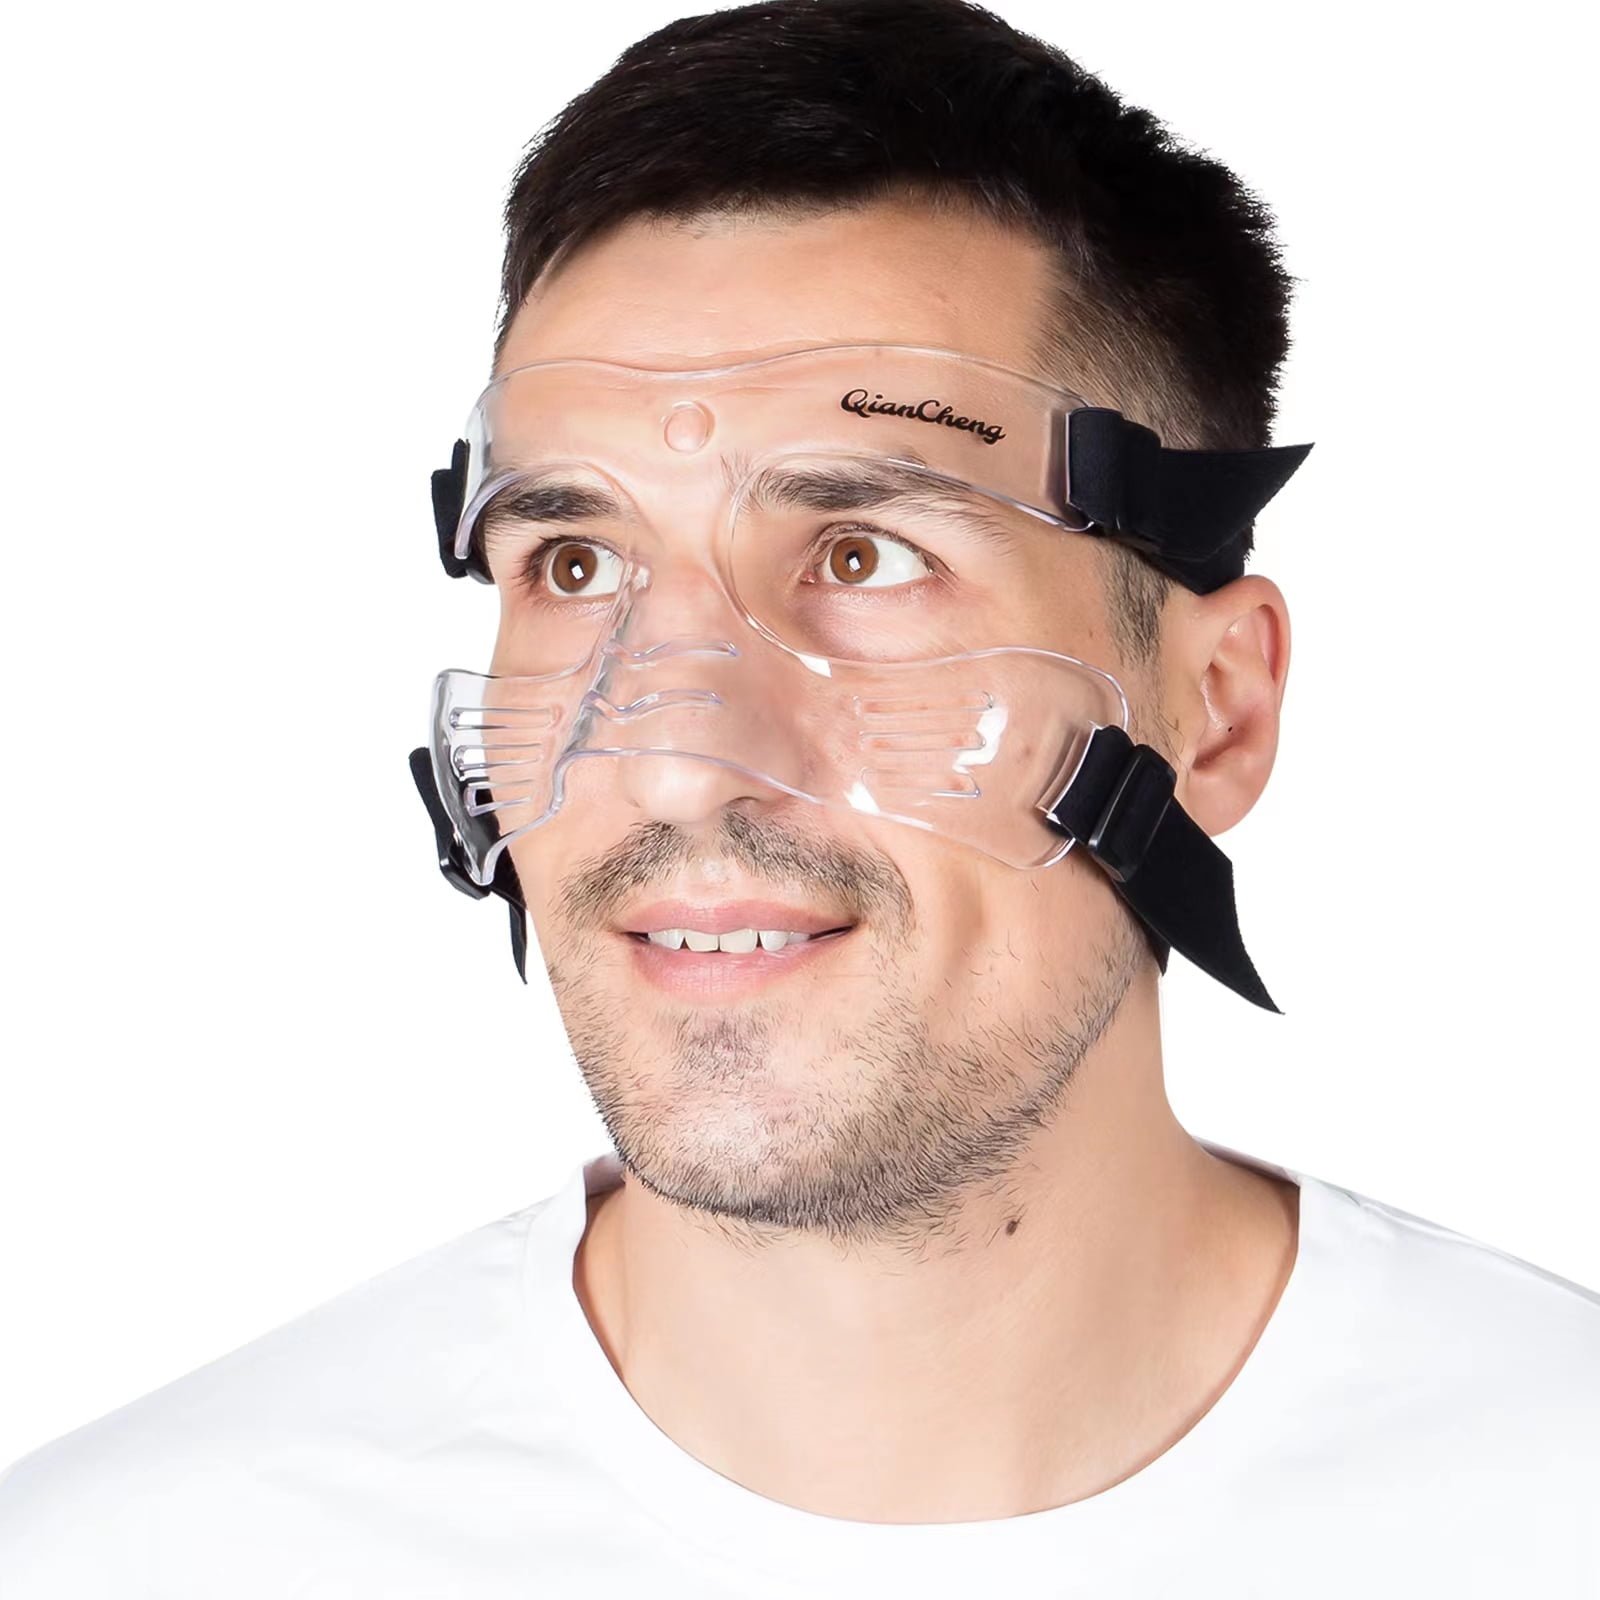 Qiancheng Nose Guard for Broken Nose - Adjustable Sports Face Guard with Padding Carrying Bag Face Shield, Protection from Impact Injuries to Nose and Face for Unisex Adult - Walmart.com